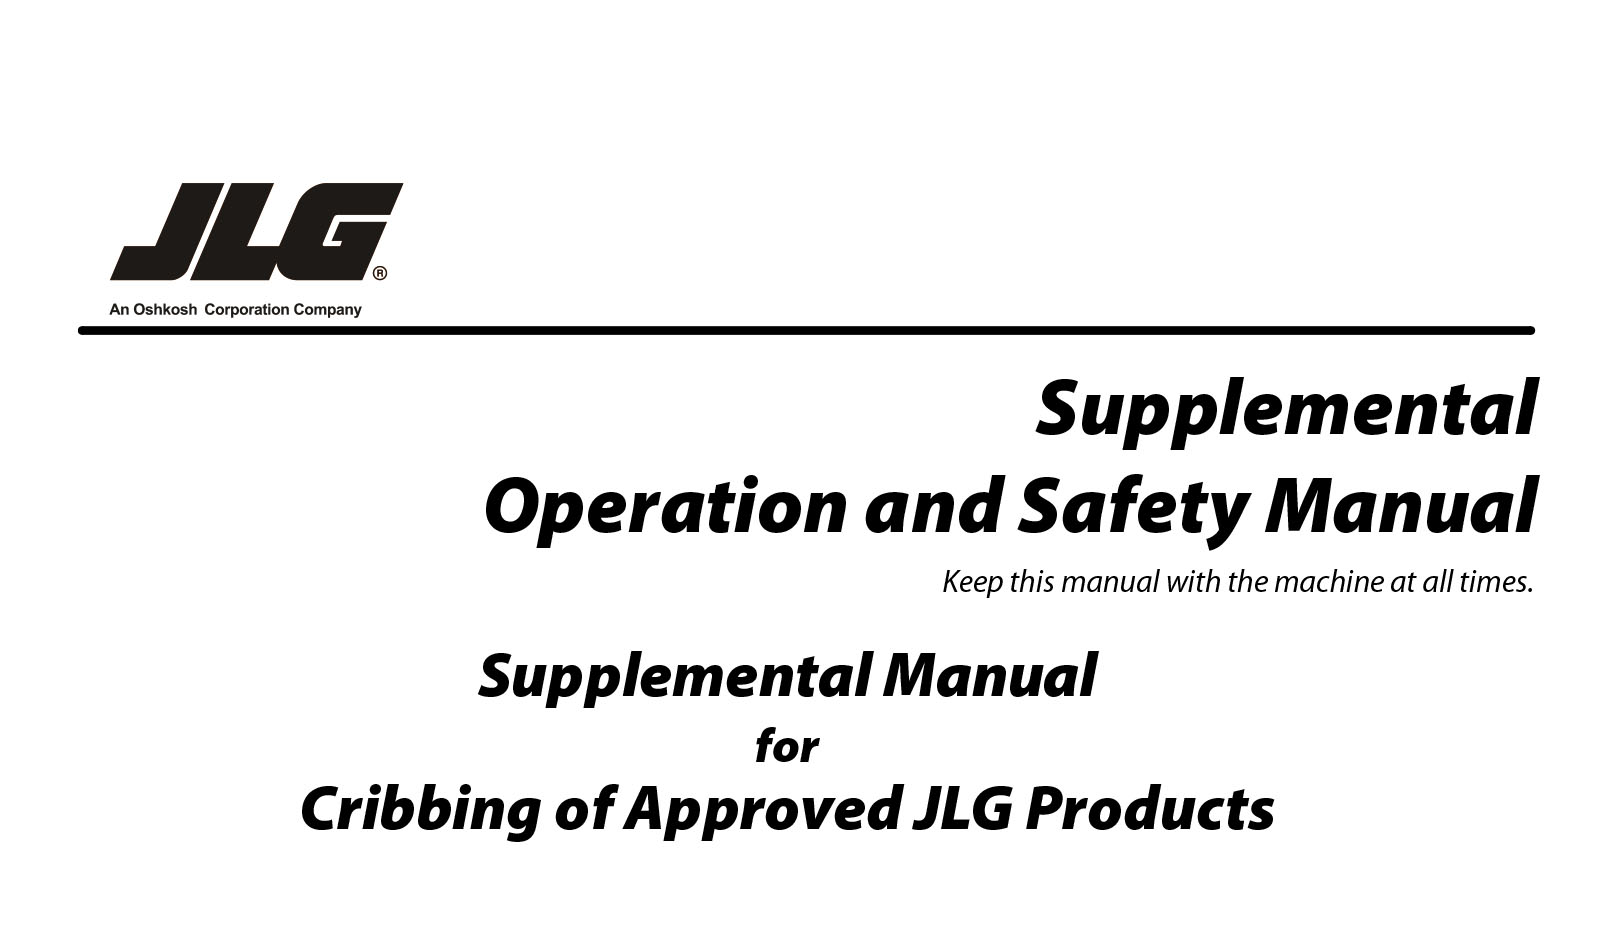 JLG Supplemental Operation and Safety Manual For Cribbing of Approved JLG Products